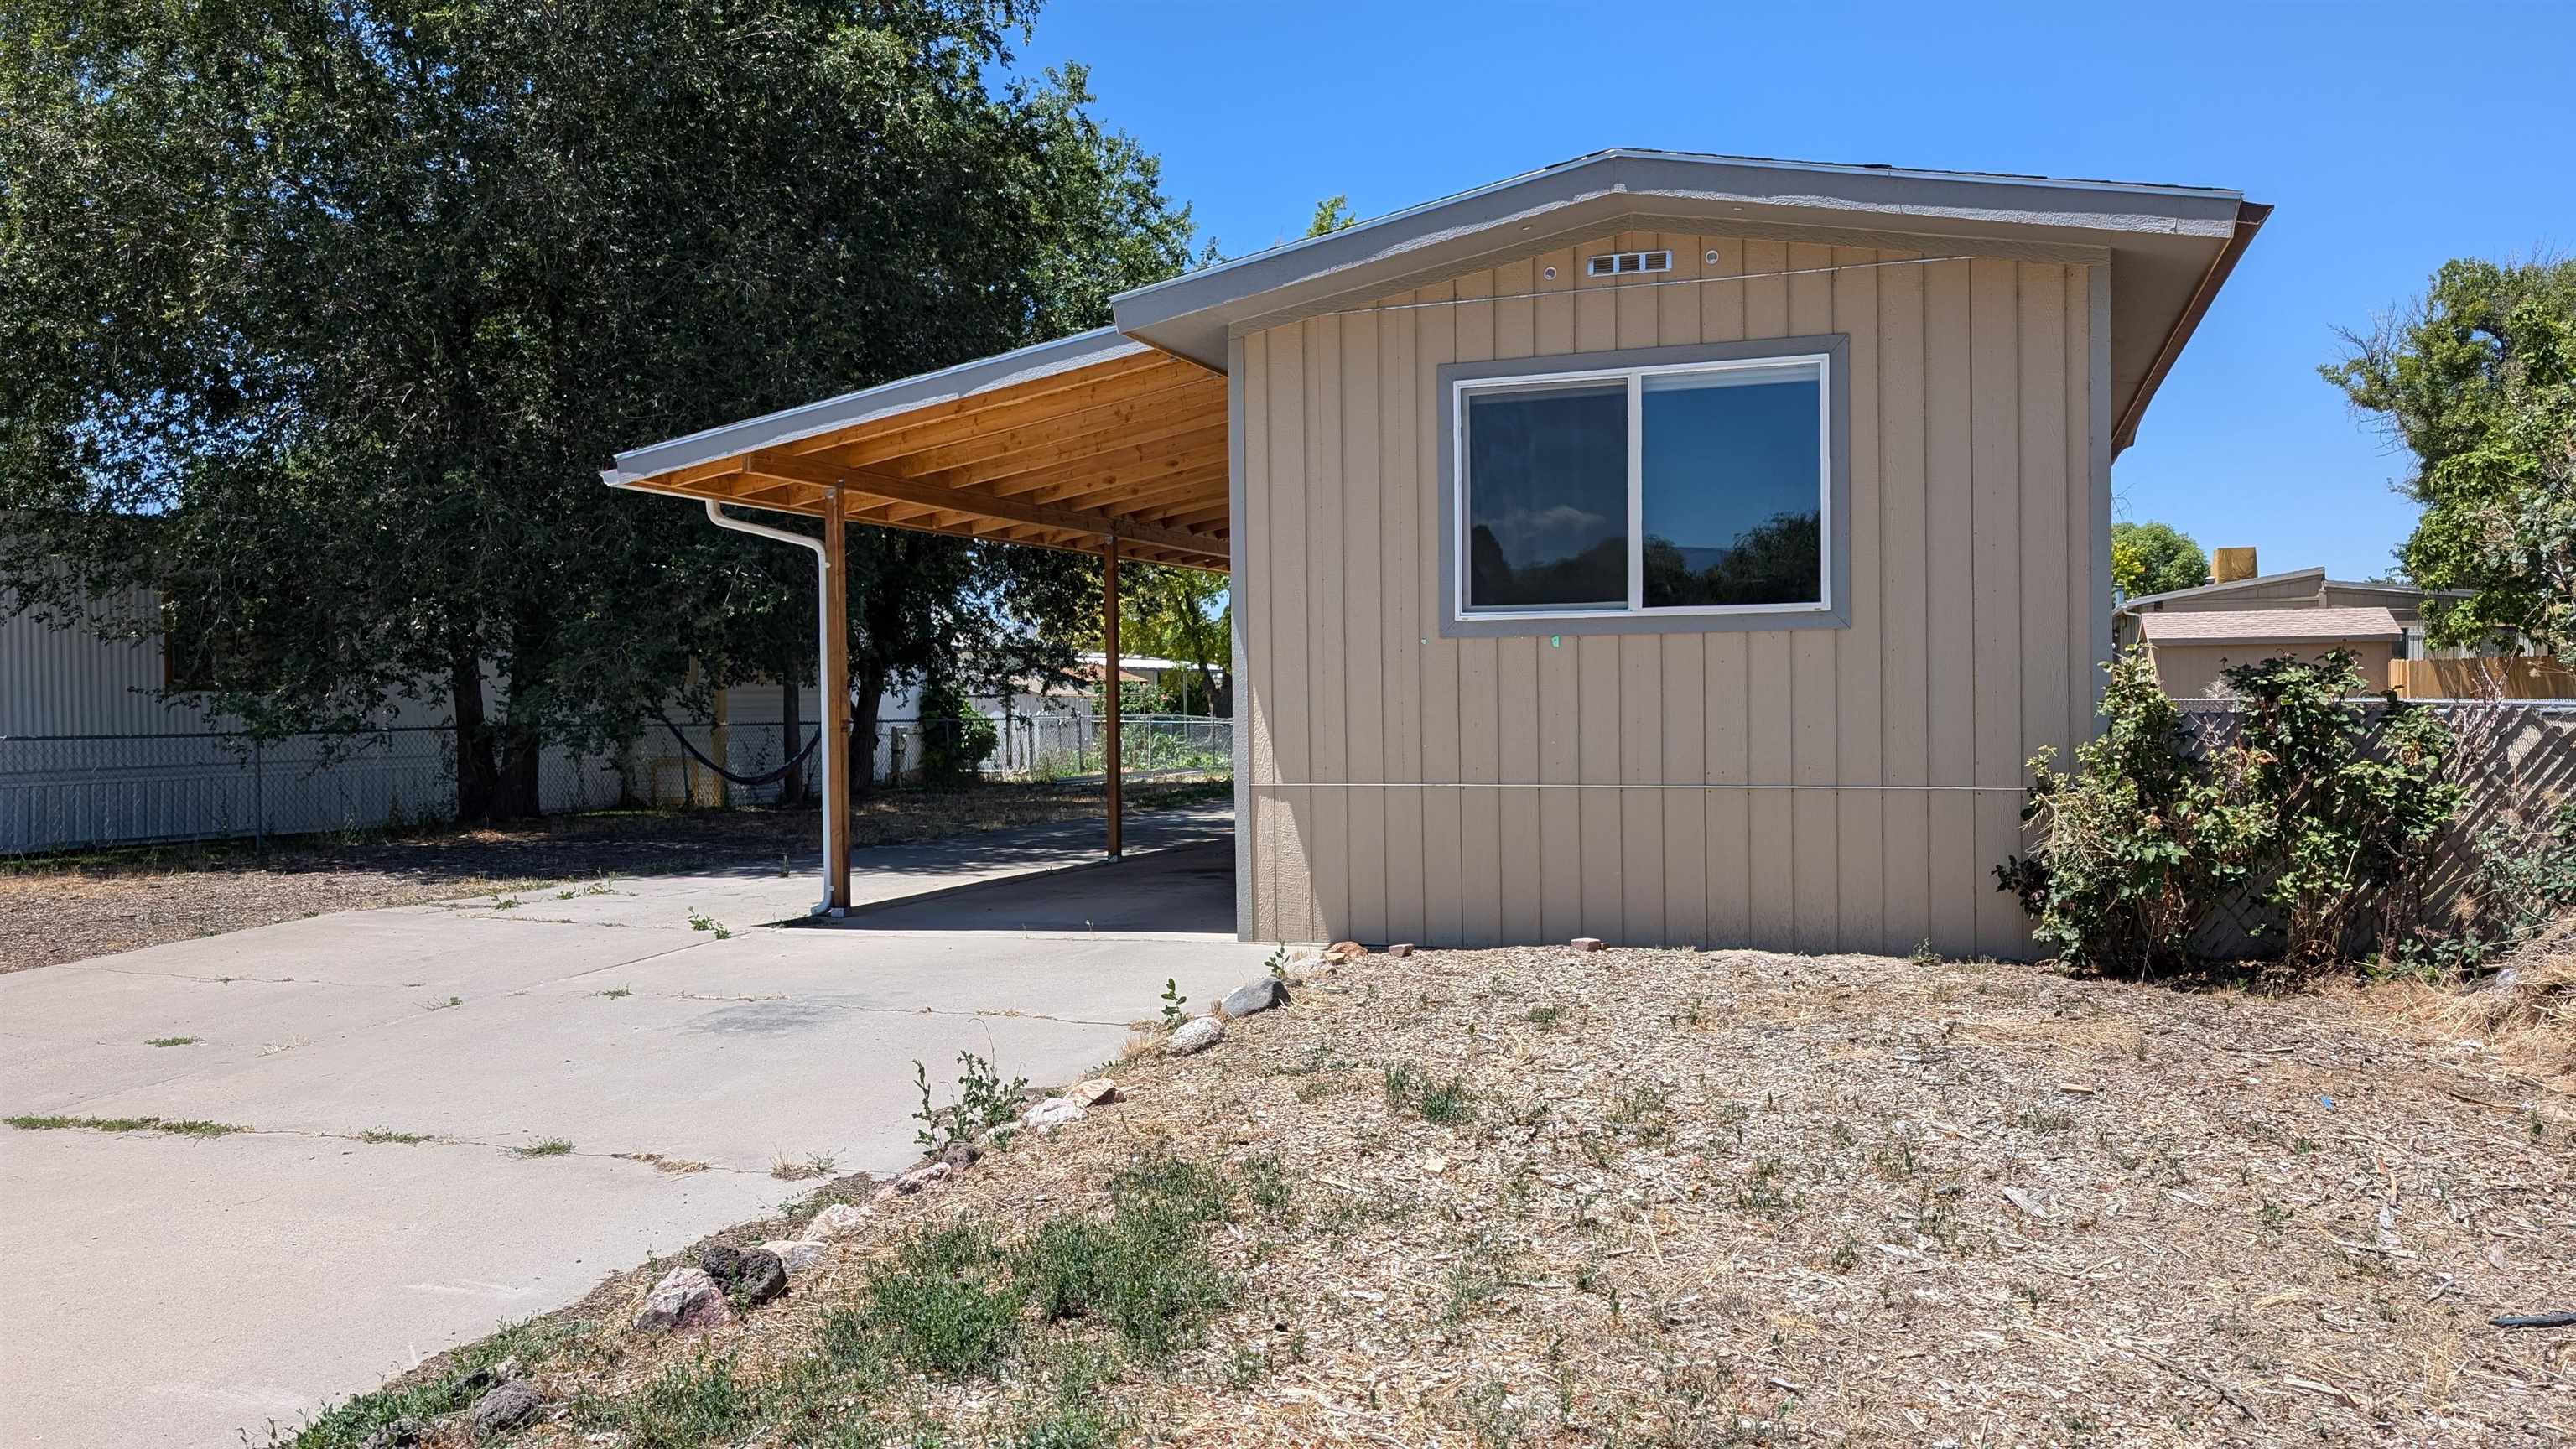 Check out this recently remodeled 1974 single wide on its own lot and no HOA, with 3 bedrooms 1.5 bathrooms. As you enter you will be greeted with an open living room, kitchen, and dining room area! Remodeled features included new roof, flooring, exterior paint and siding, bathrooms, walls, windows, kitchen cabinets and countertops. Big yard for you to create it your own. THIS PROPERTY WILL NOT GO FHA financing.